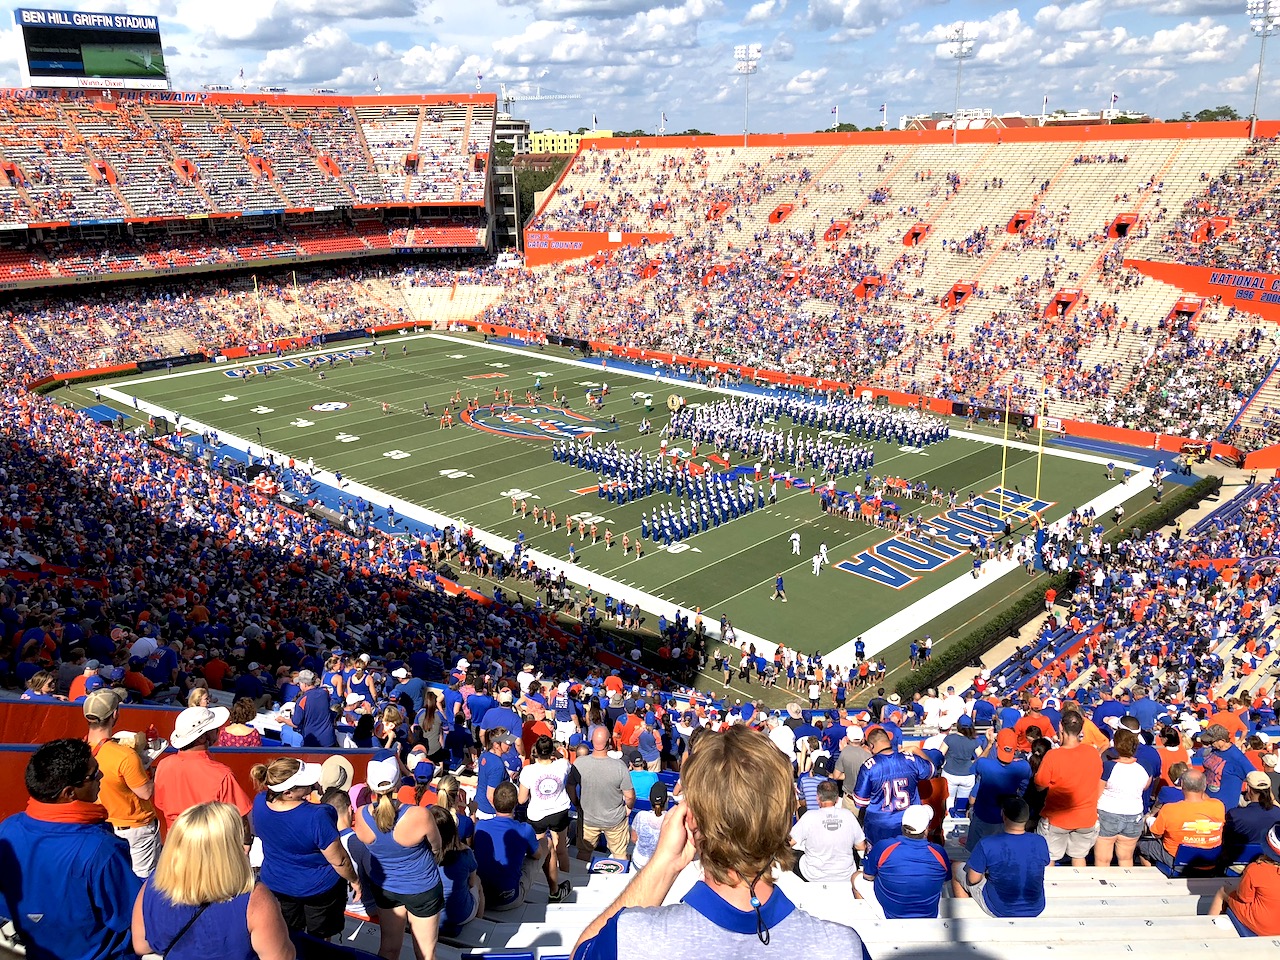 UF Sports - 2-day itinerary for families in Gainesville, FL #gainesville #florida #tourofflorida #alachuacounty #gainesvilleFL #universityofflorida #UF #gogators #Gainesvillewithkids #gainesvilleitinerary